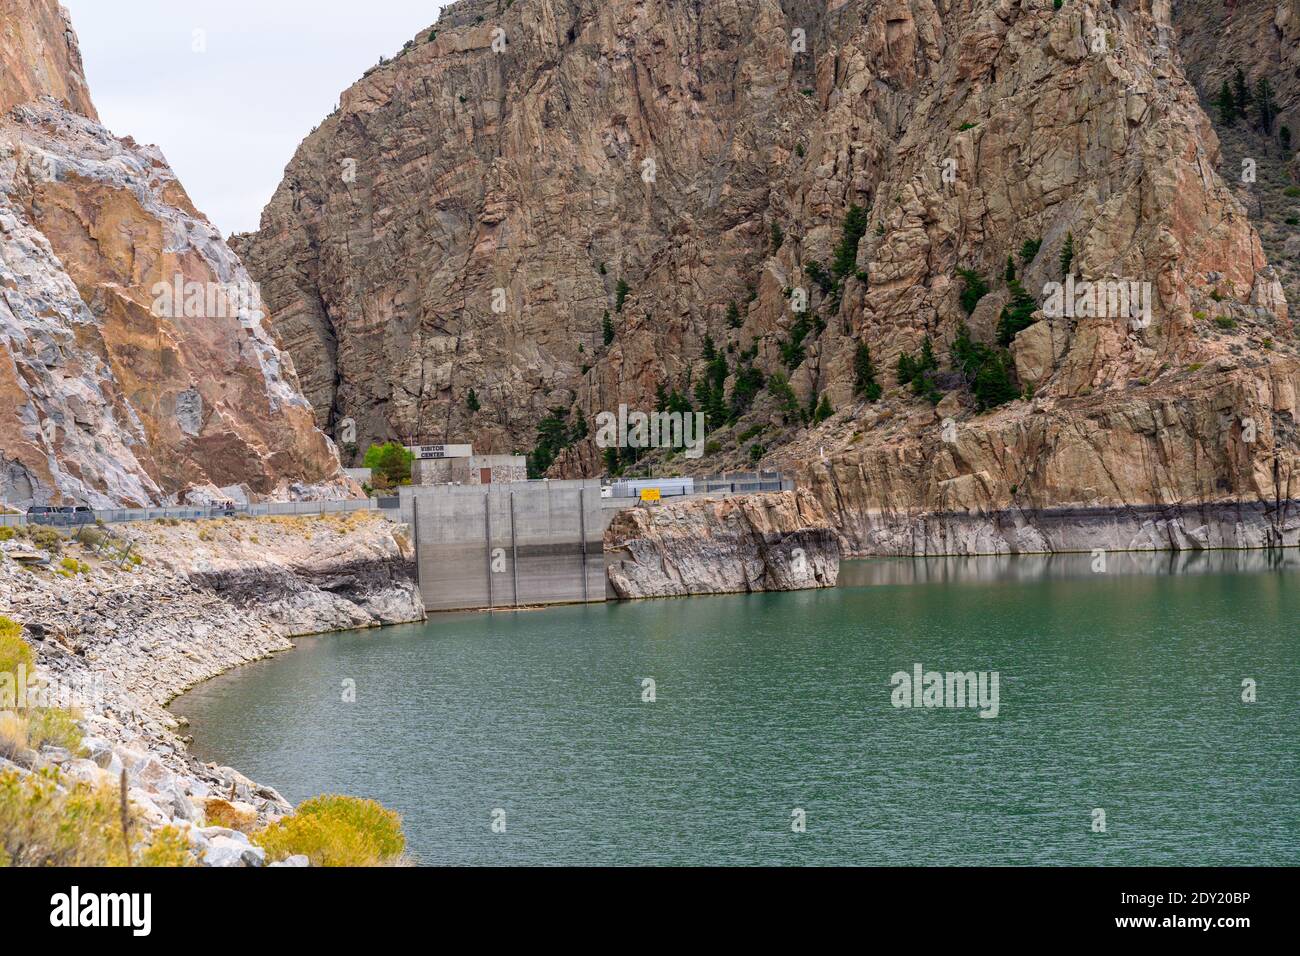 Cody, Wyoming - September 25, 2020: The Buffalo Bill Dam and Visitor Center during fall Stock Photo